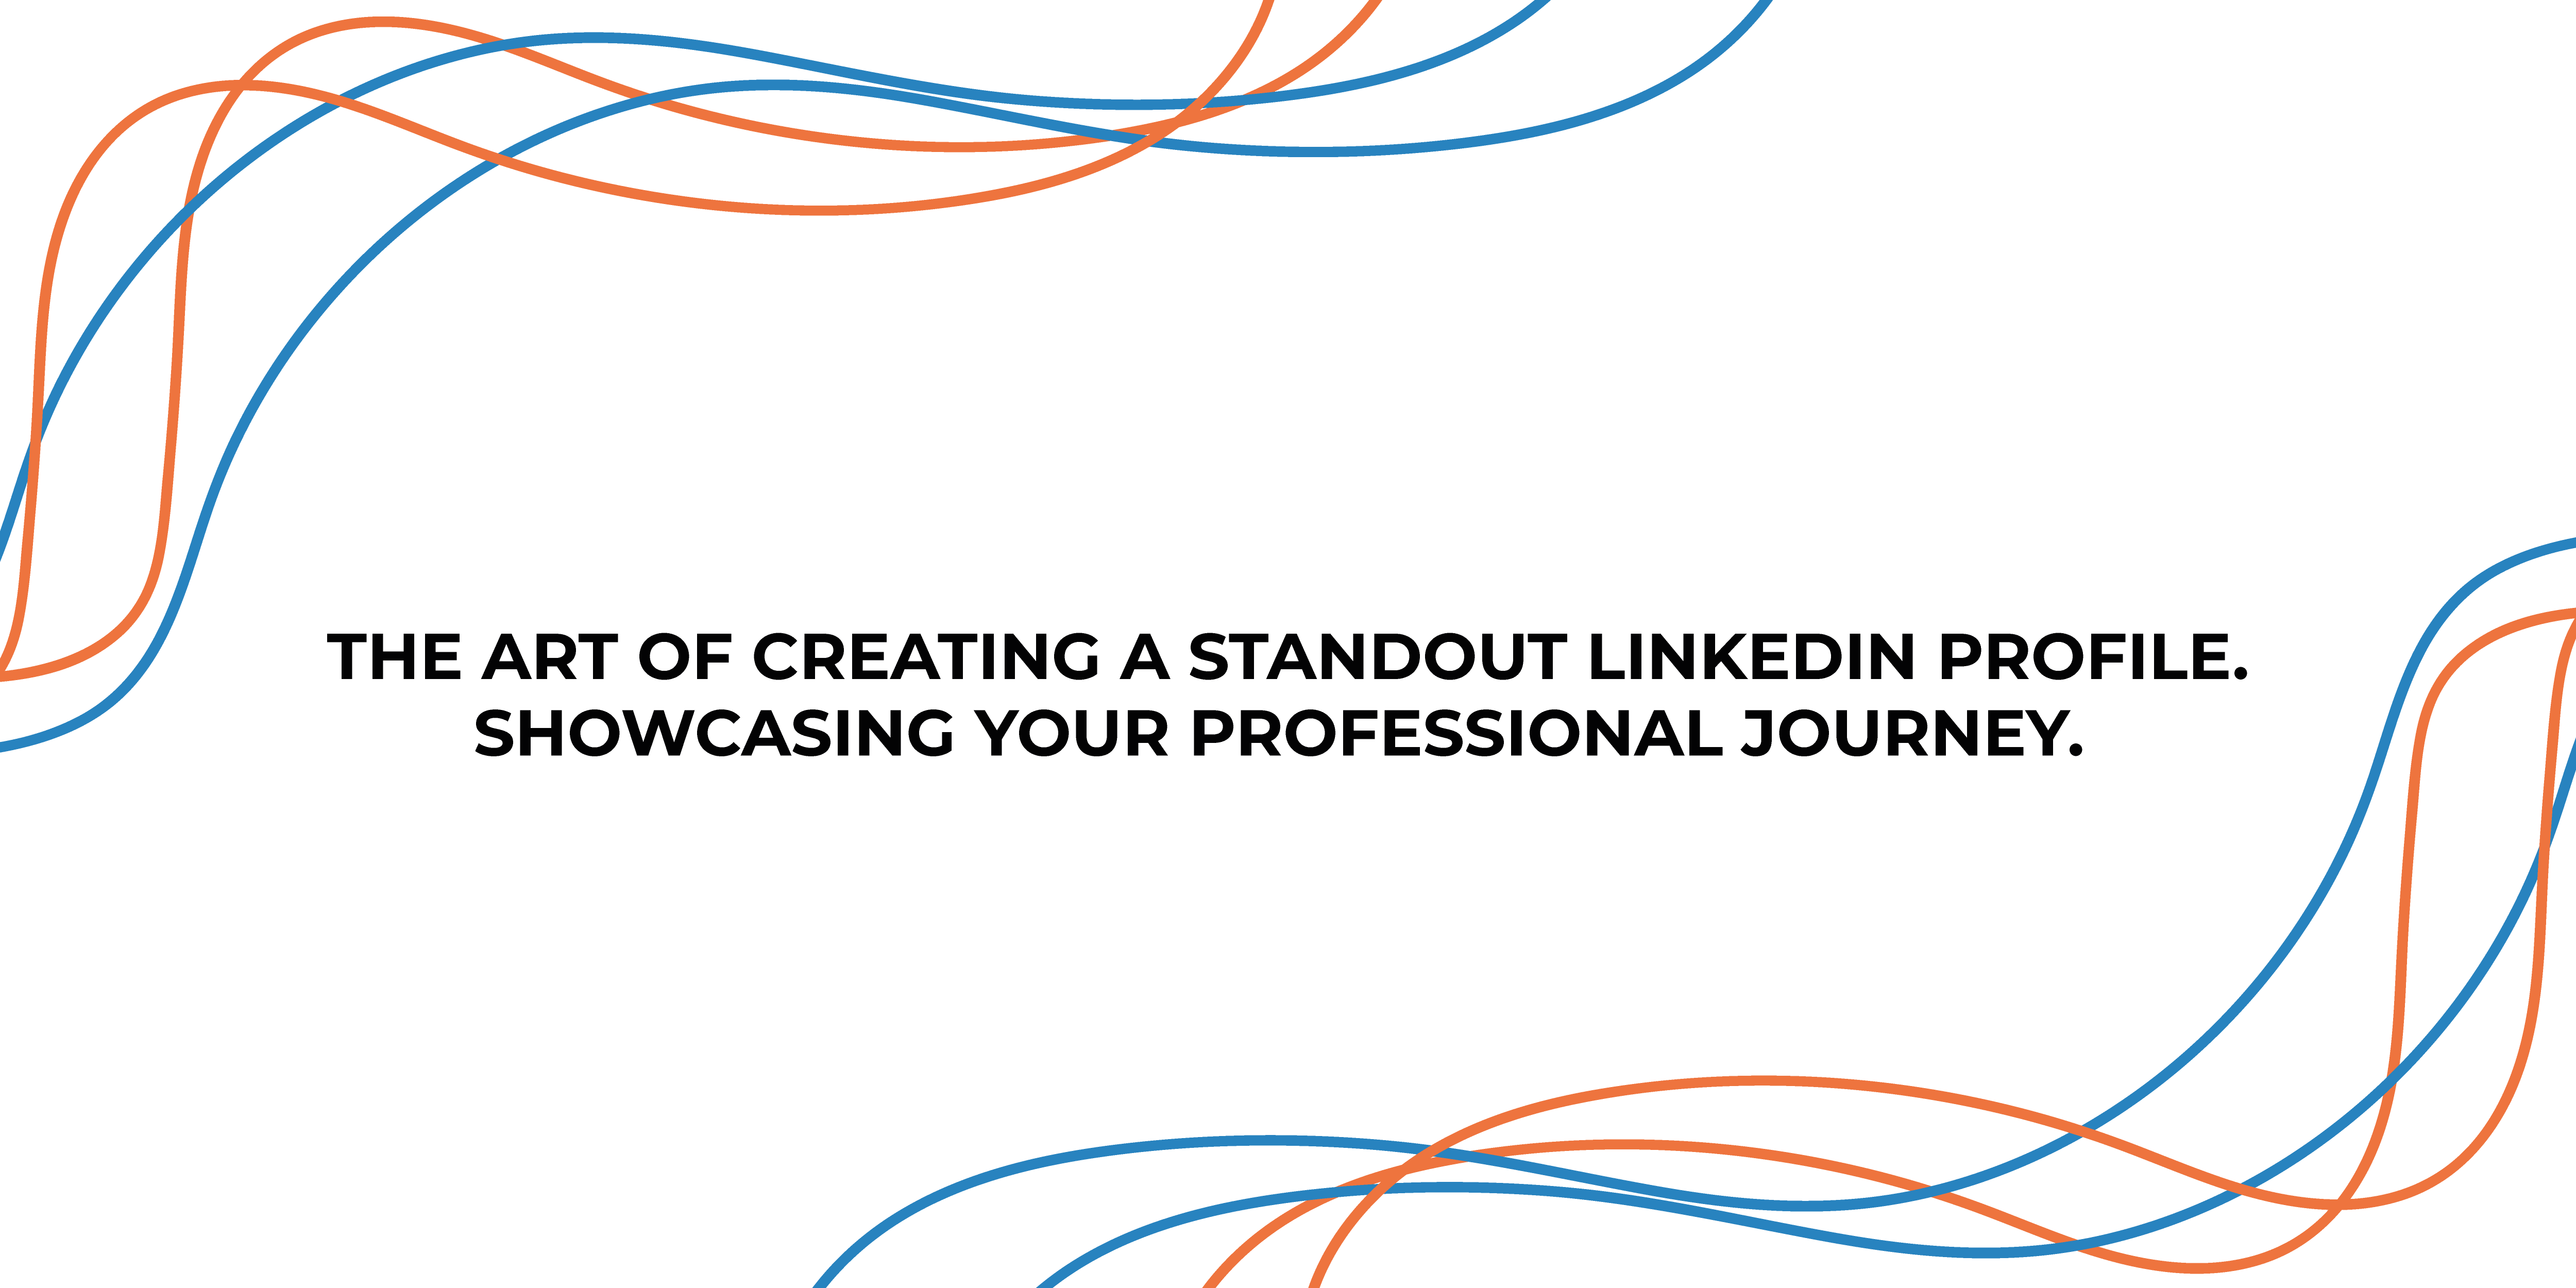 The Art of Creating a Standout LinkedIn Profile: Showcasing Your Professional Journey